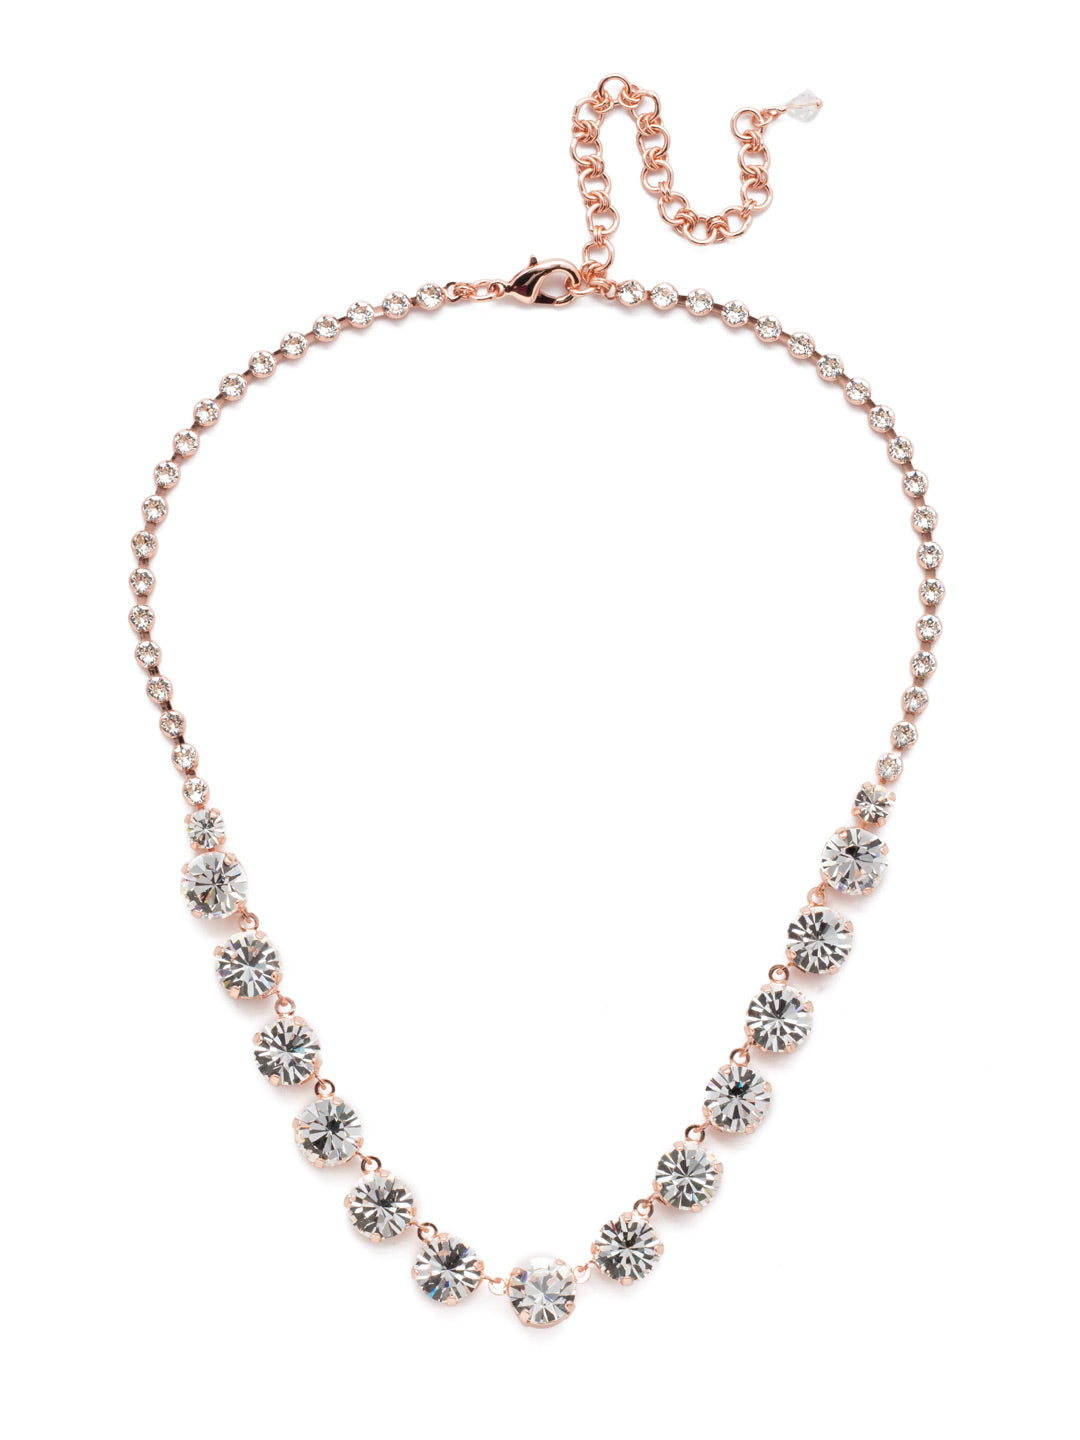 Ashley Rivoli Tennis Necklace - NCU19RGCRY - <p>A classic beauty! This necklace boasts a little extra flare with its beautifully faceted rivoli crystals and decorative stone encrusted chain. You're set to sparkle from every angle. From Sorrelli's Crystal collection in our Rose Gold-tone finish.</p>